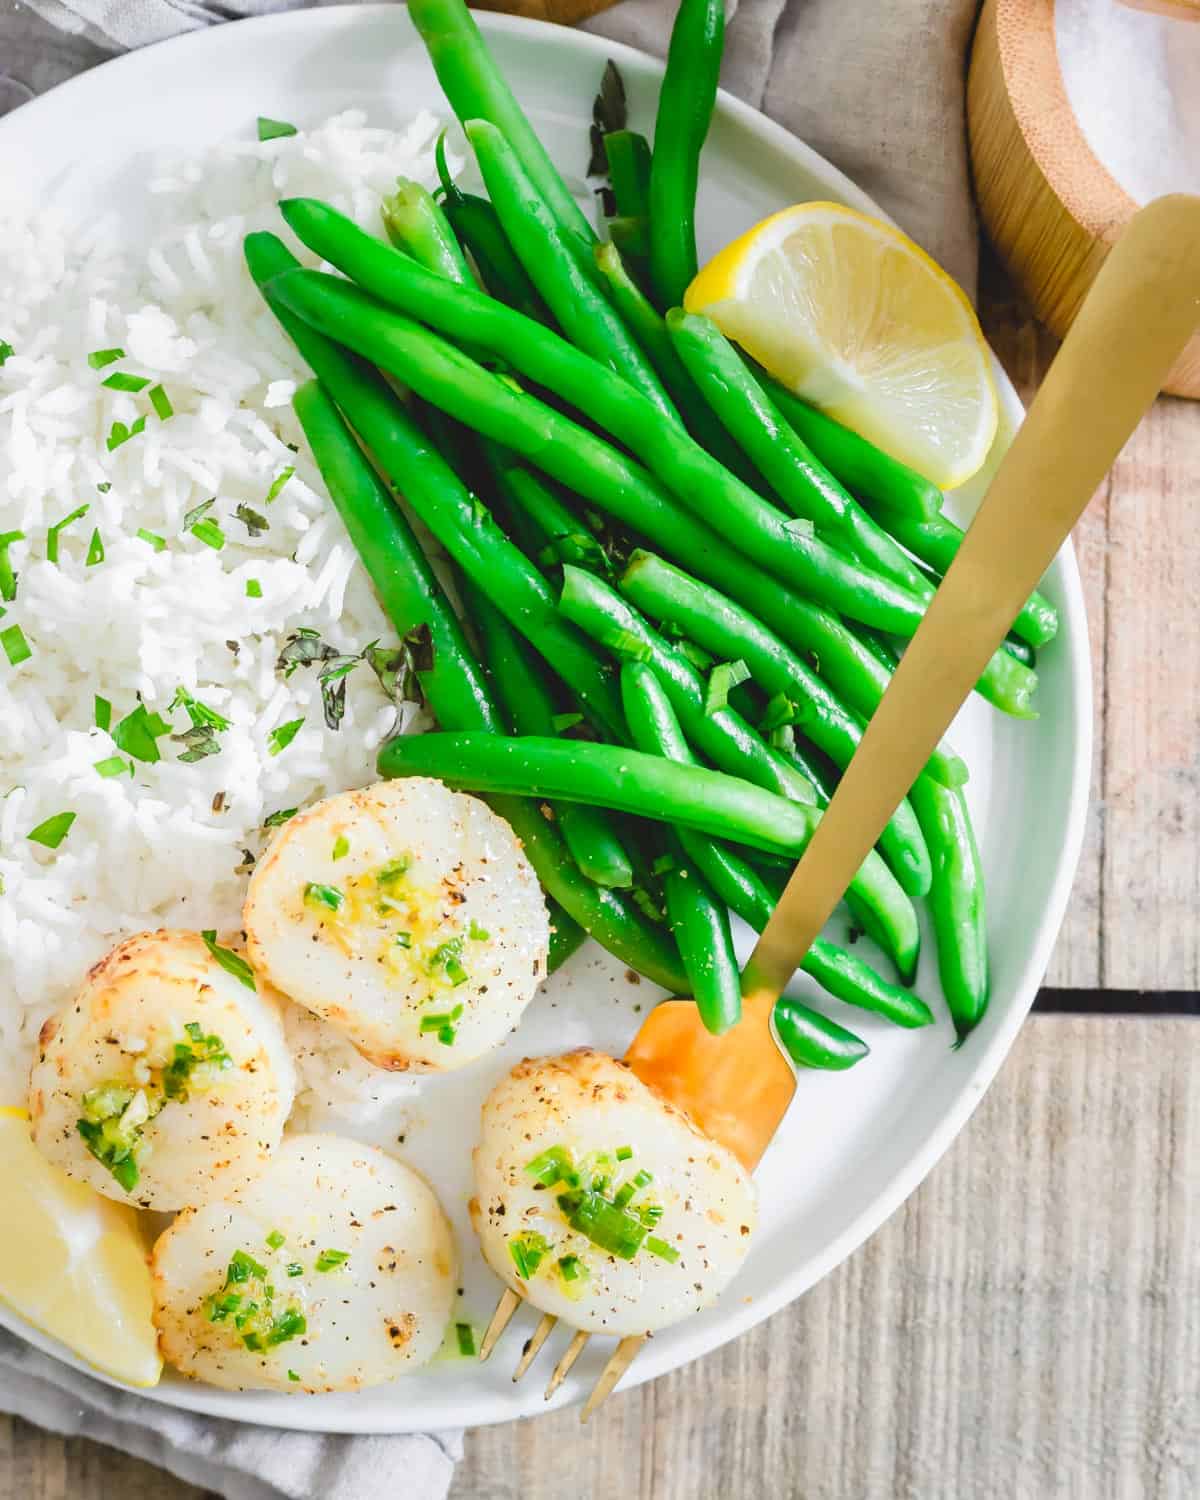 Recipe for air fryer scallops served with a quick butter sauce, chives, garlic and lemon.